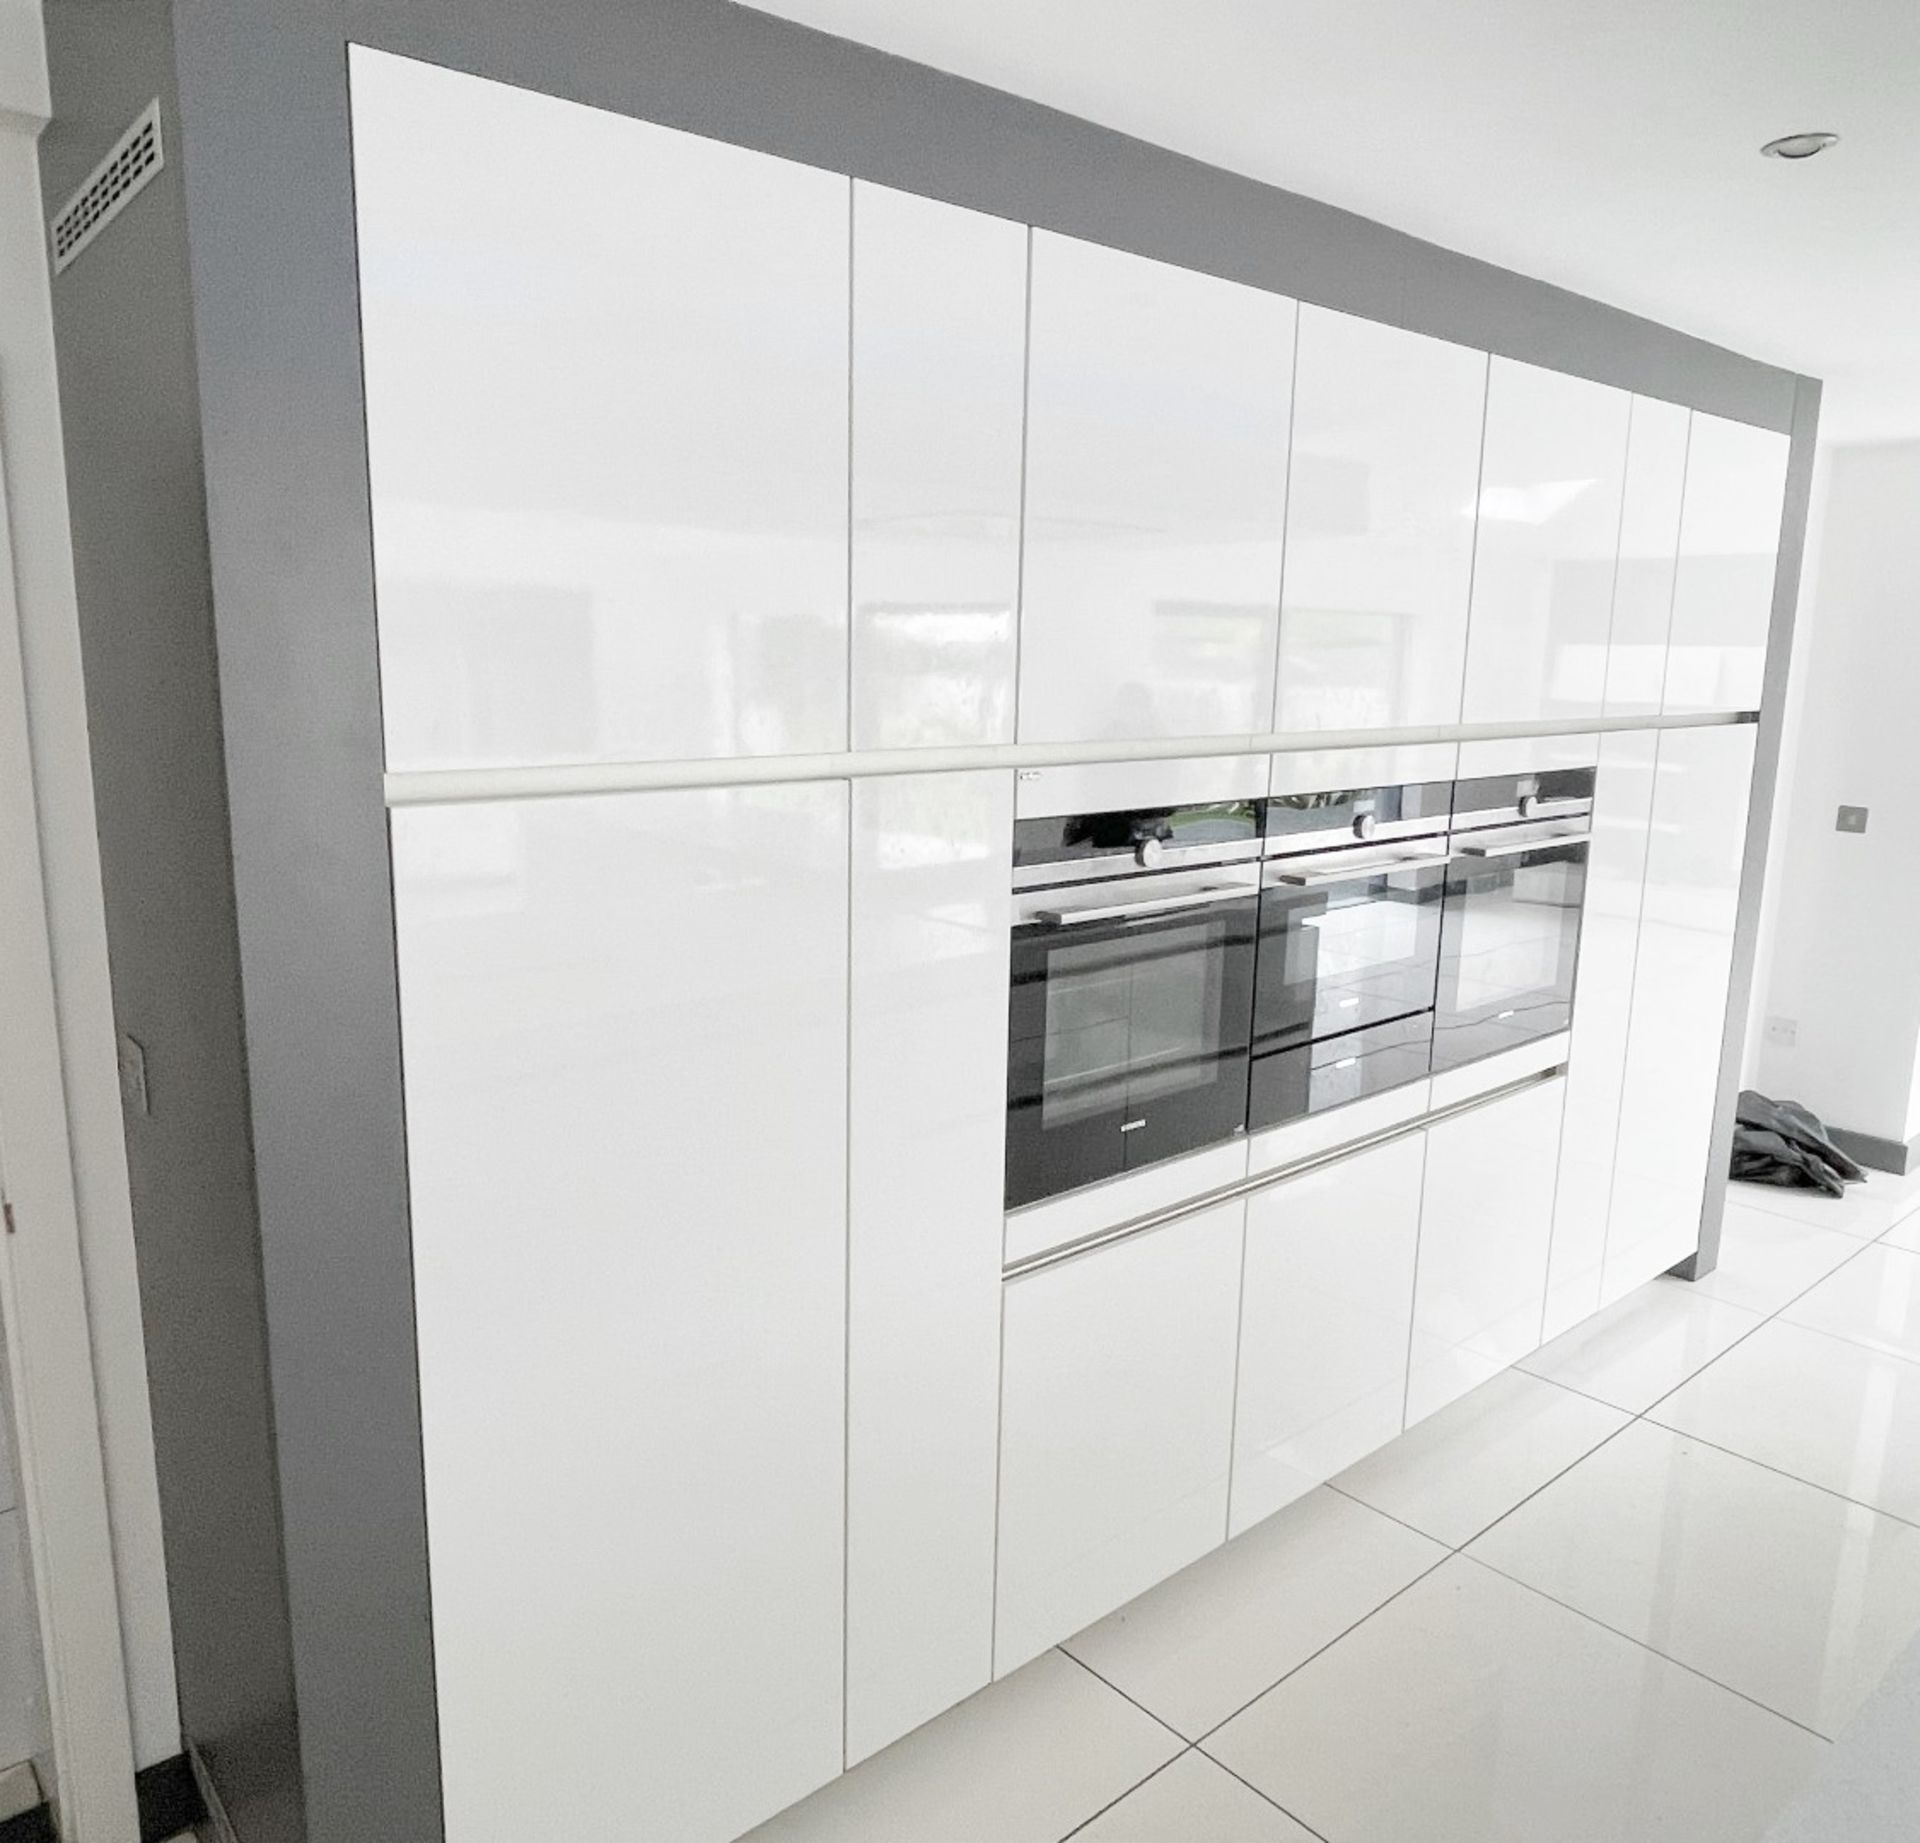 1 x SieMatic Contemporary Fitted Kitchen With Branded Appliances, Central Island + Corian Worktops - Image 55 of 100